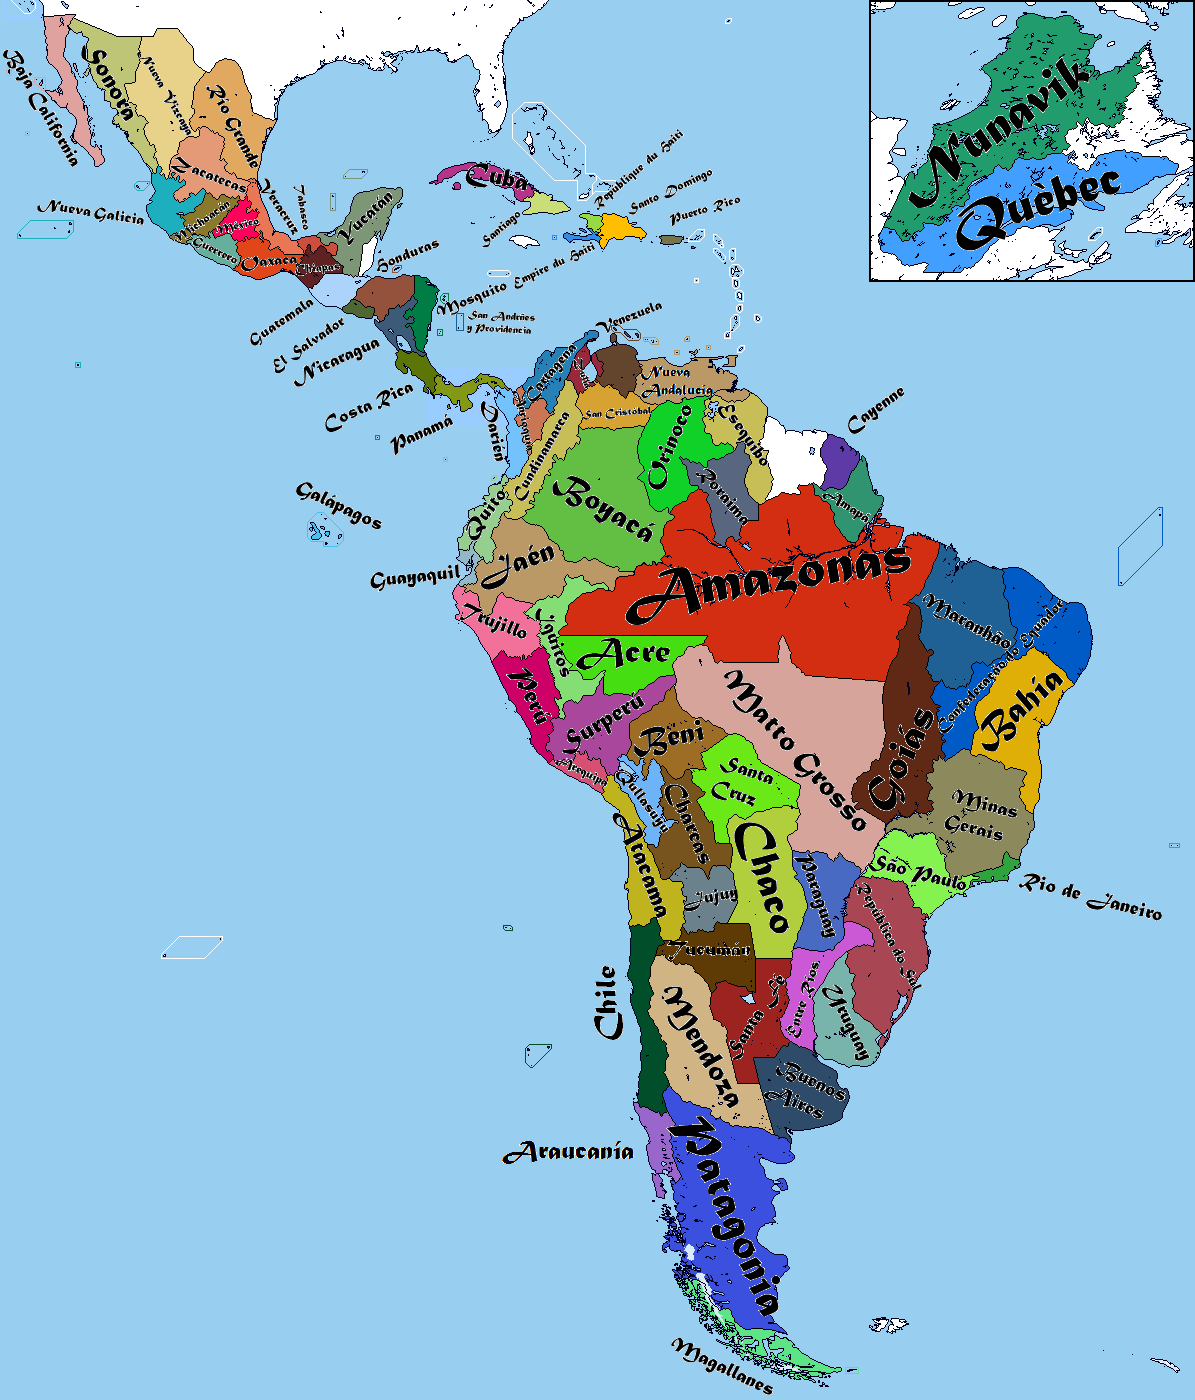 Balkanised South America text.png